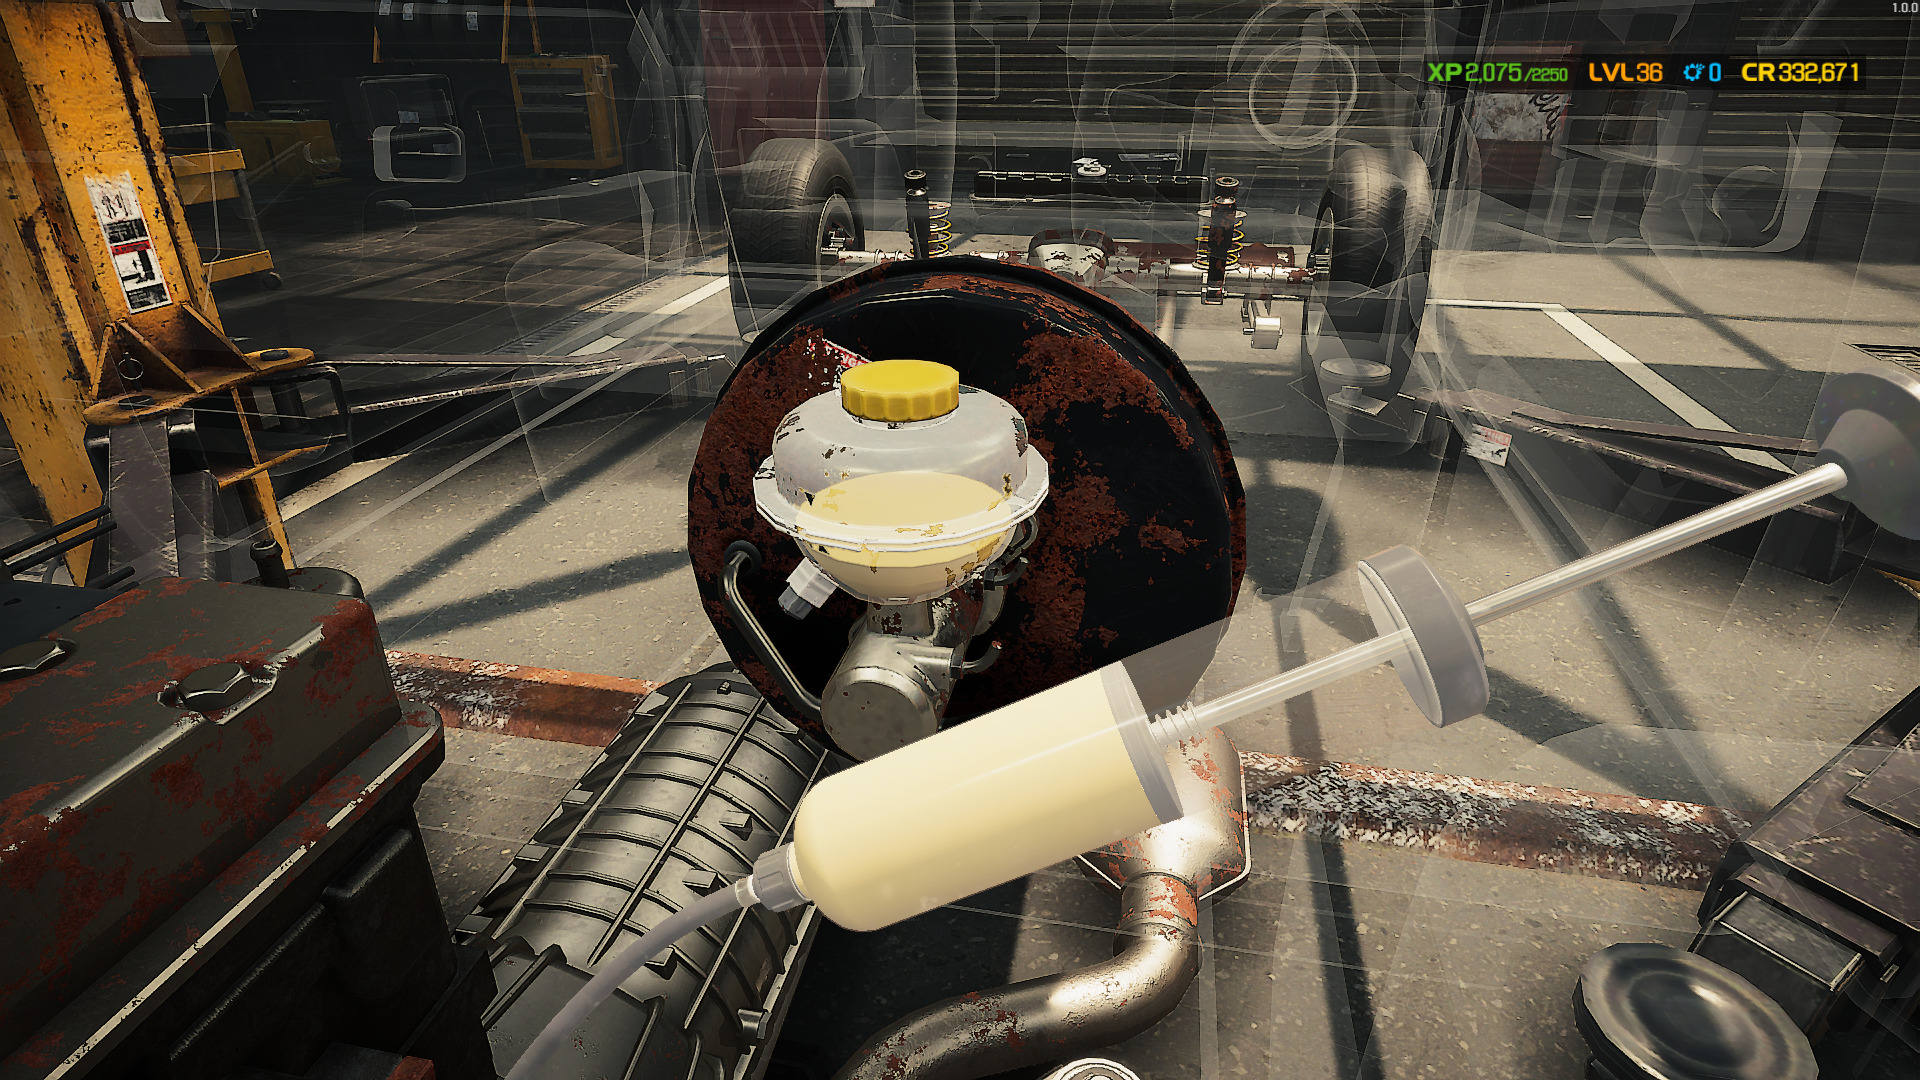 A screenshot showing the Brake Servo being drained of its fluid